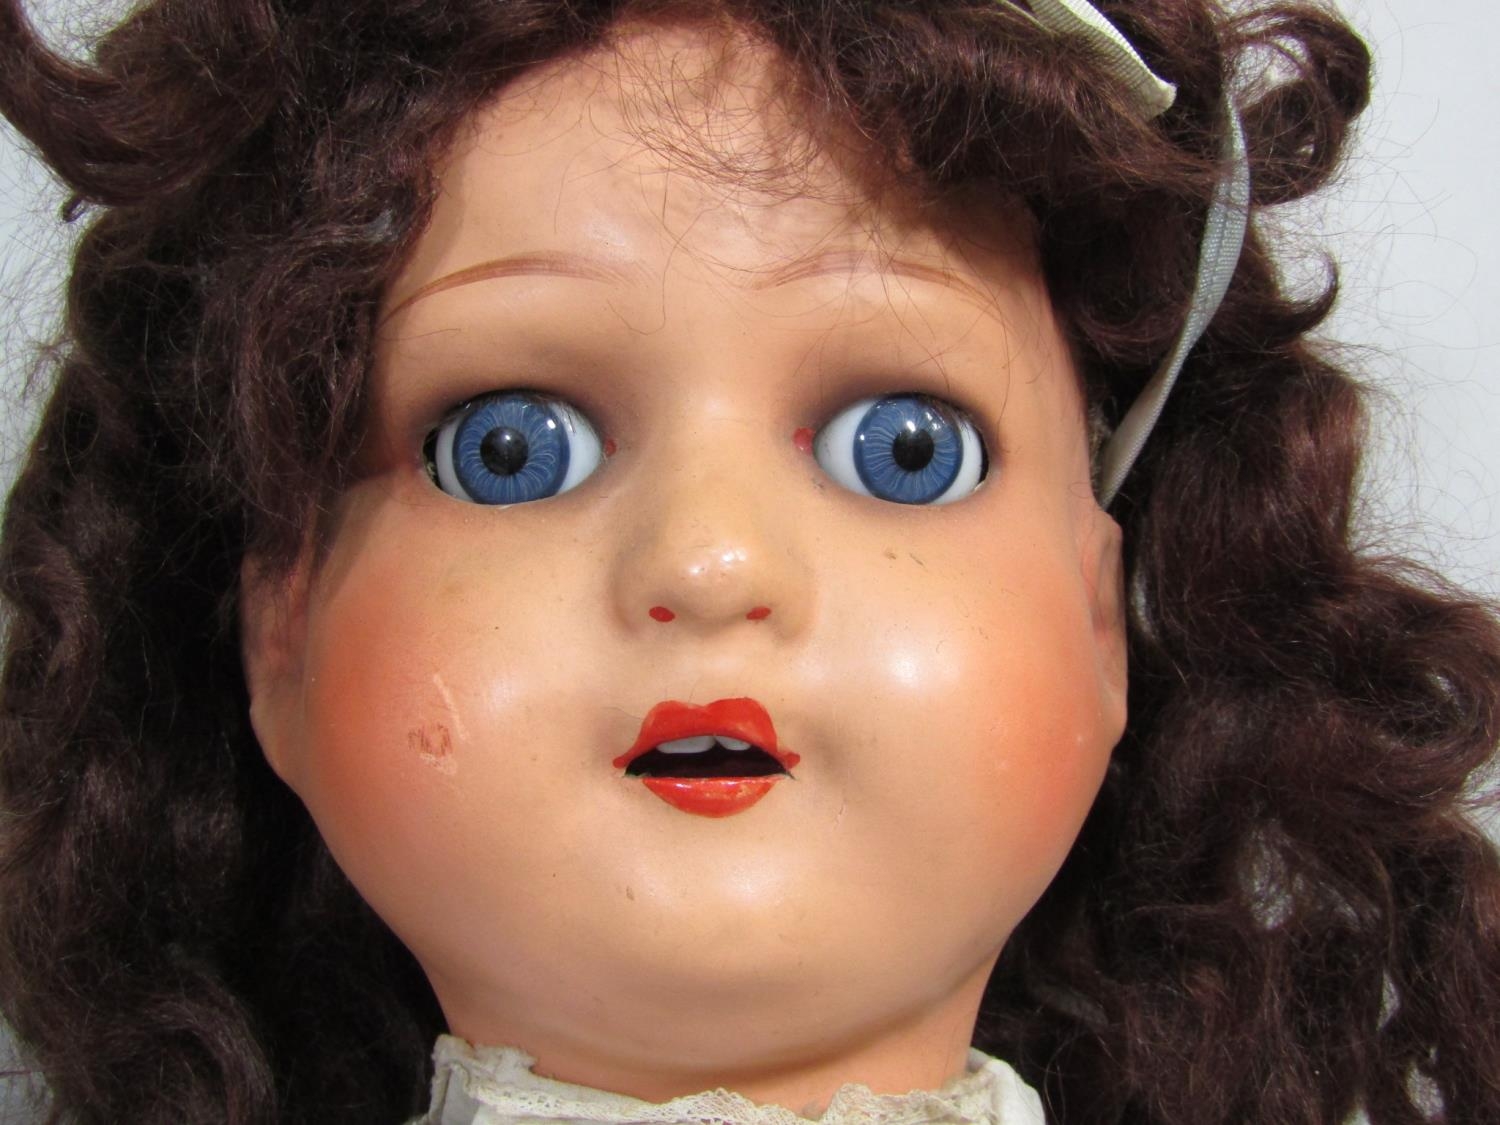 2 early 20th century large composition head dolls, both with closing blue eyes, the taller doll 75cm - Image 2 of 5